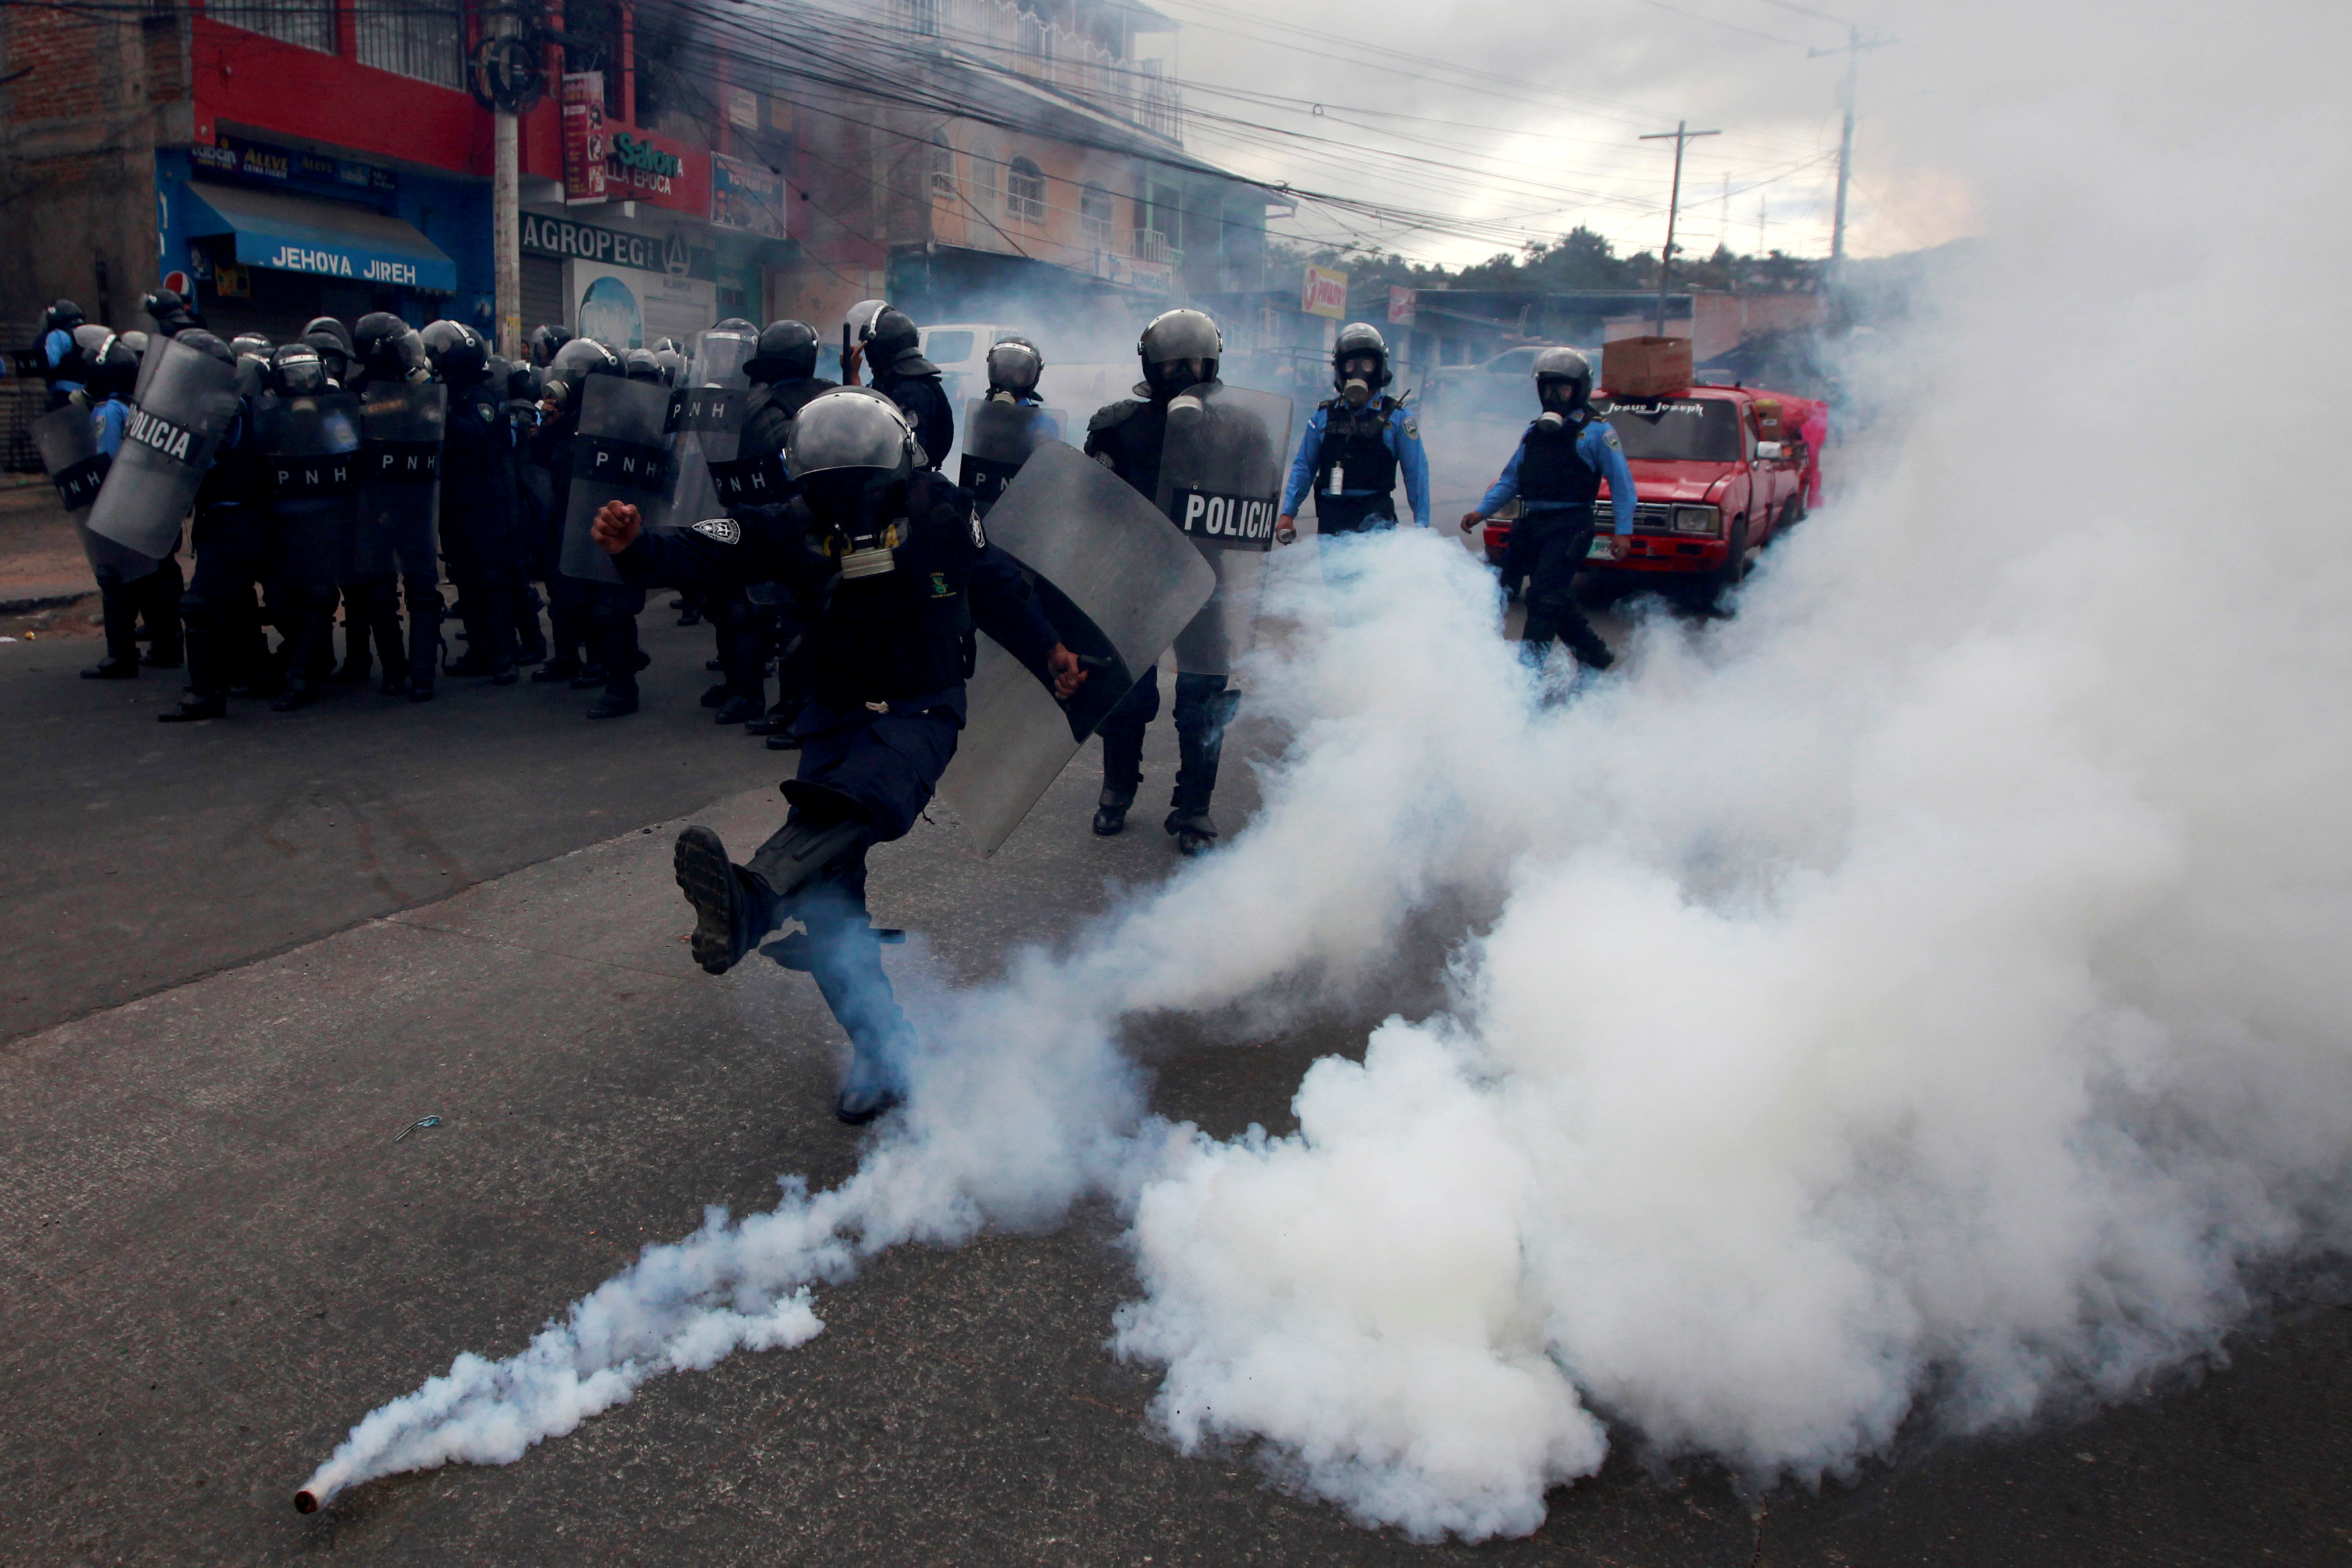 Security forces battle protesters in Honduras